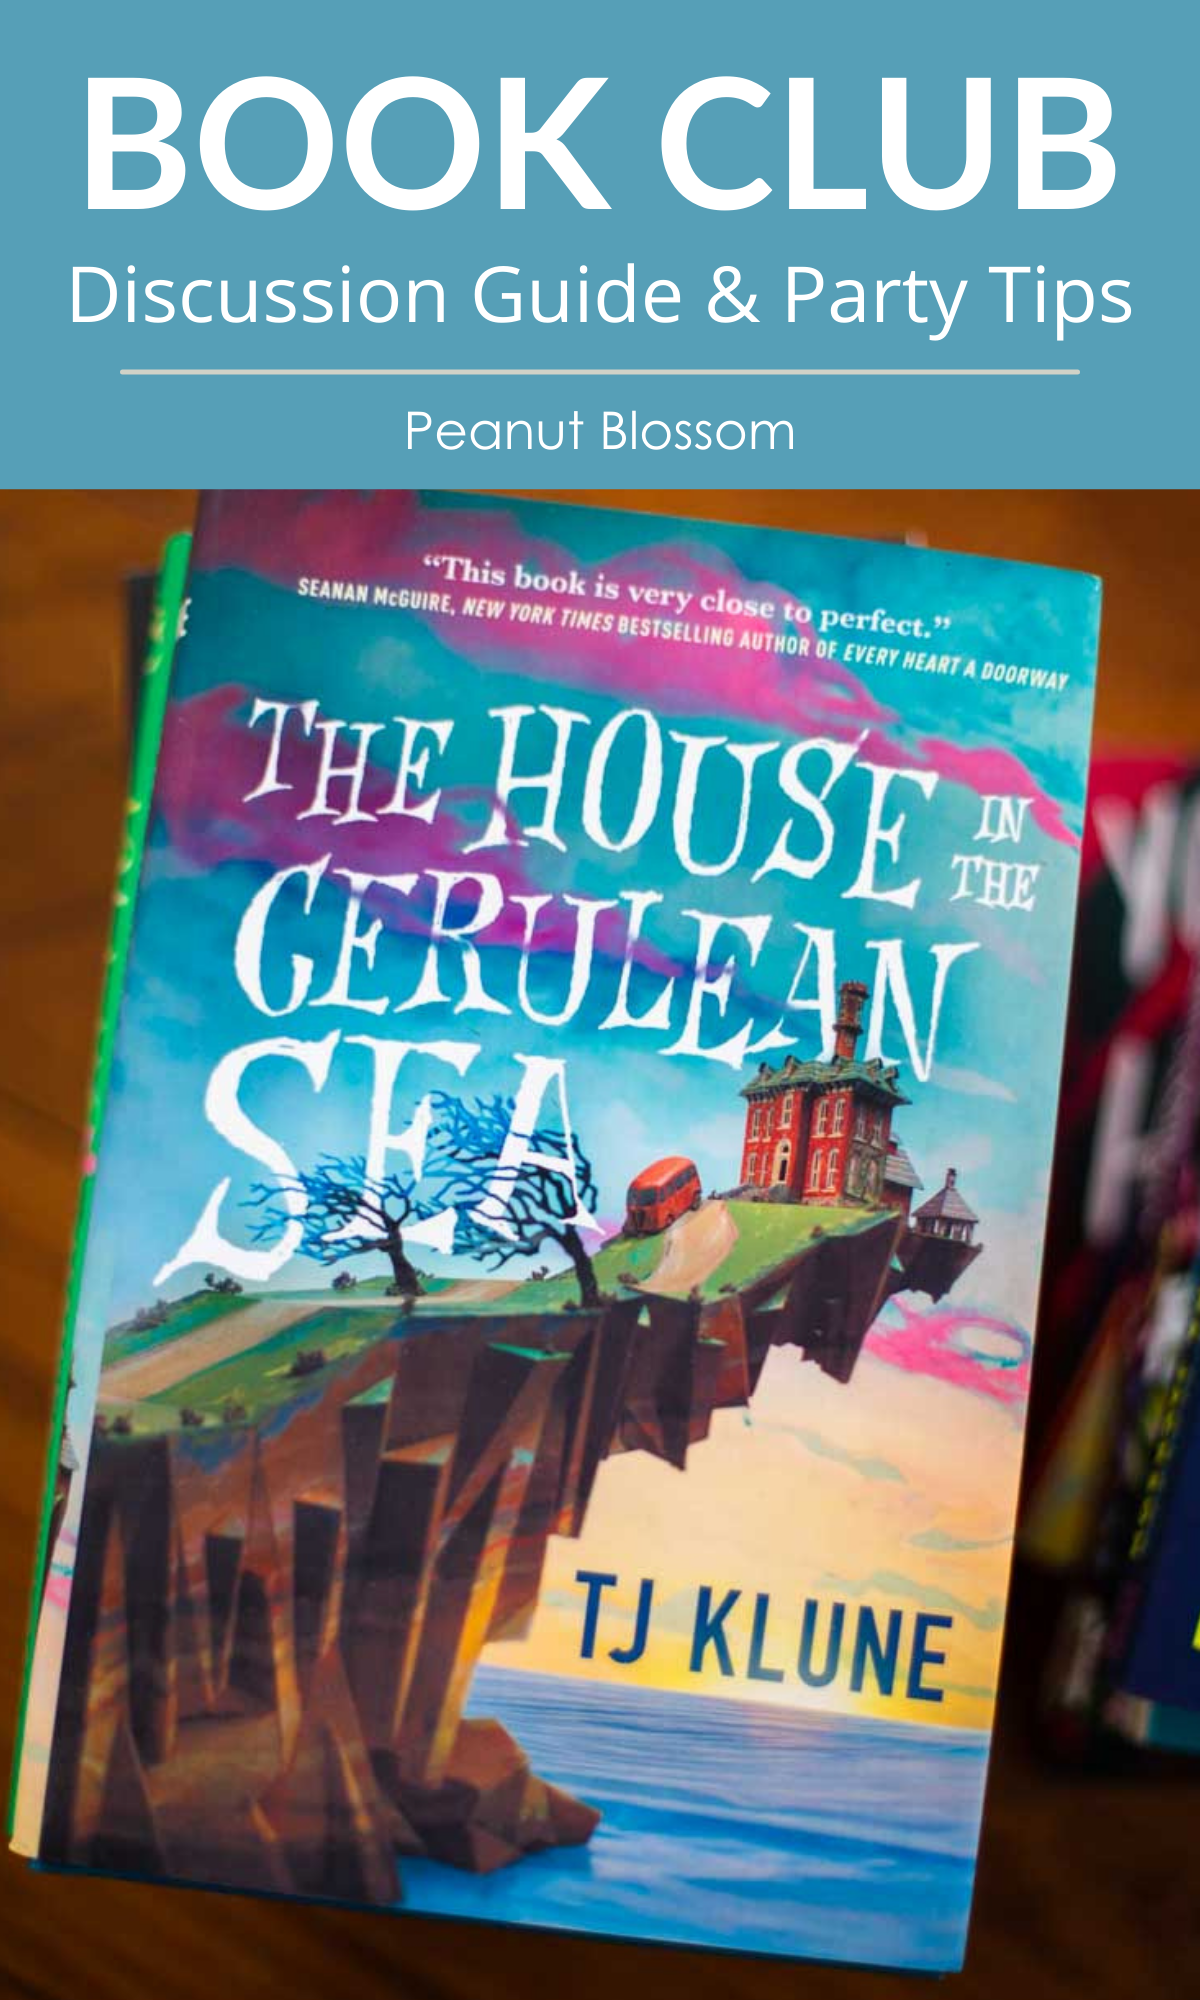 A copy of The house in the Cerulean Sea by TJ Klune with the caption: Book Club Discussion Guide.